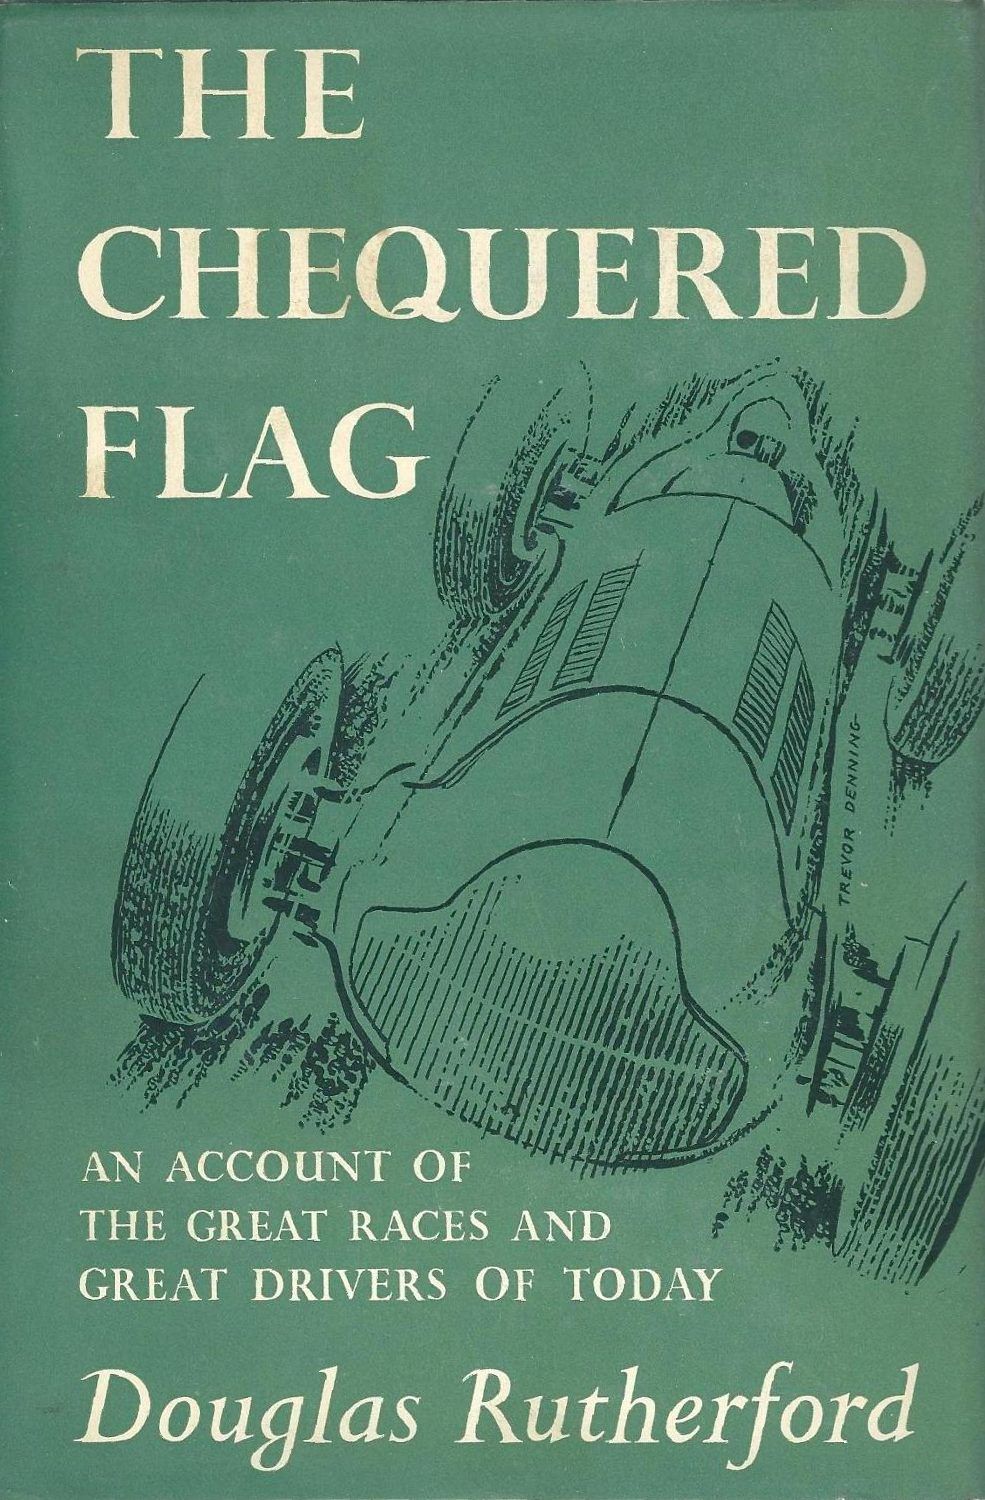 THE CHEQUERED FLAG: An Account of the Great Races and Drivers of Today